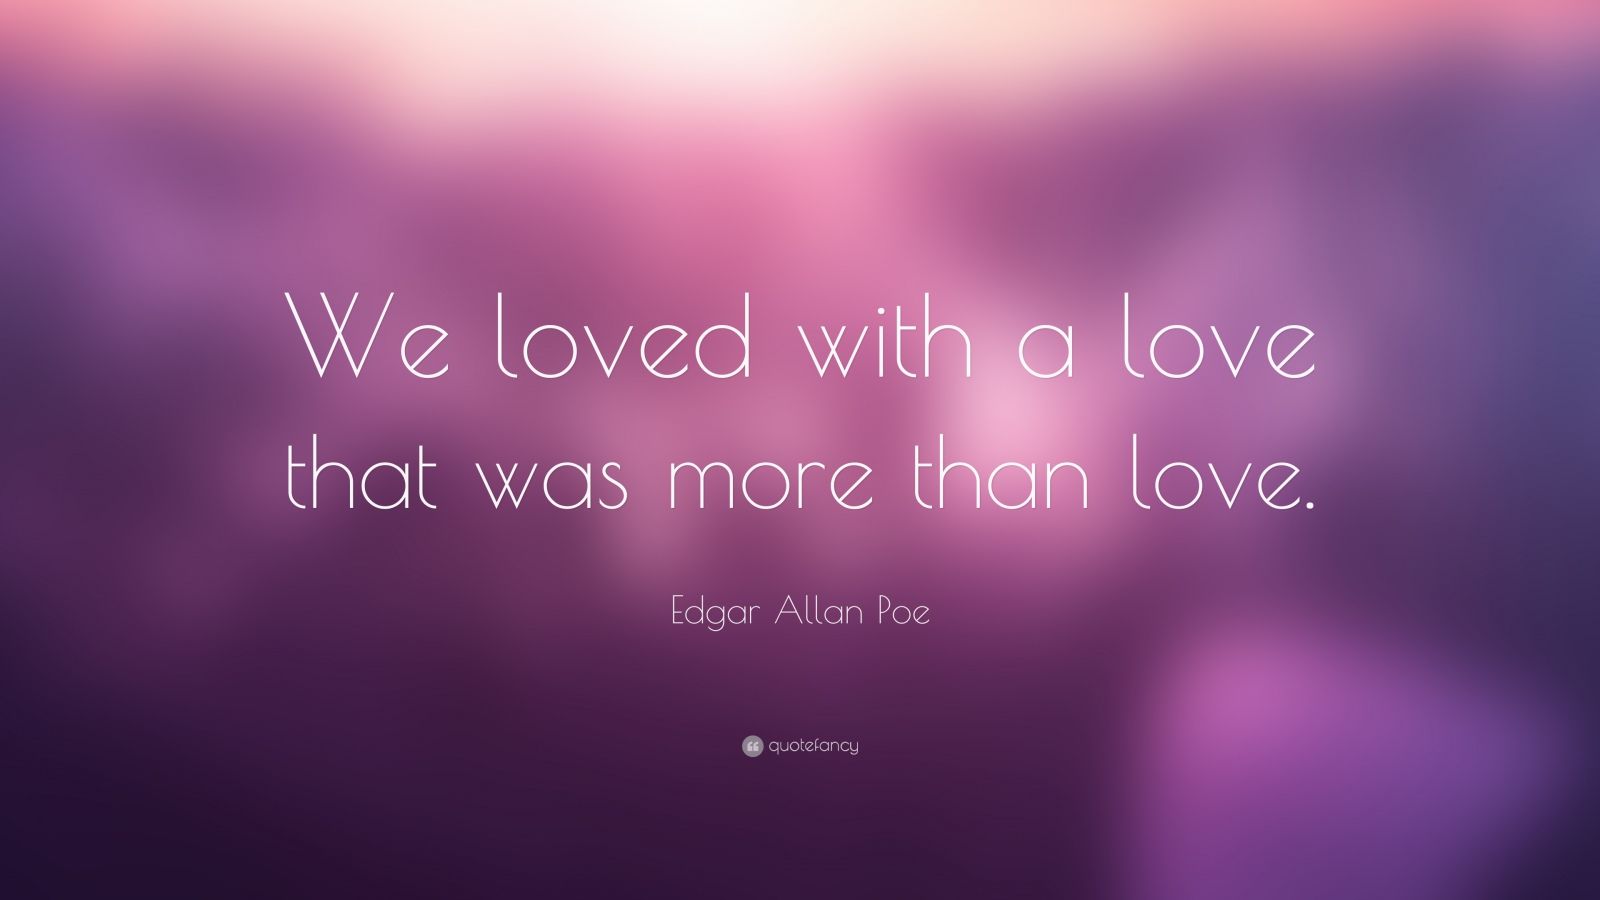 Edgar Allan Poe Quote: “We loved with a love that was more than love ...